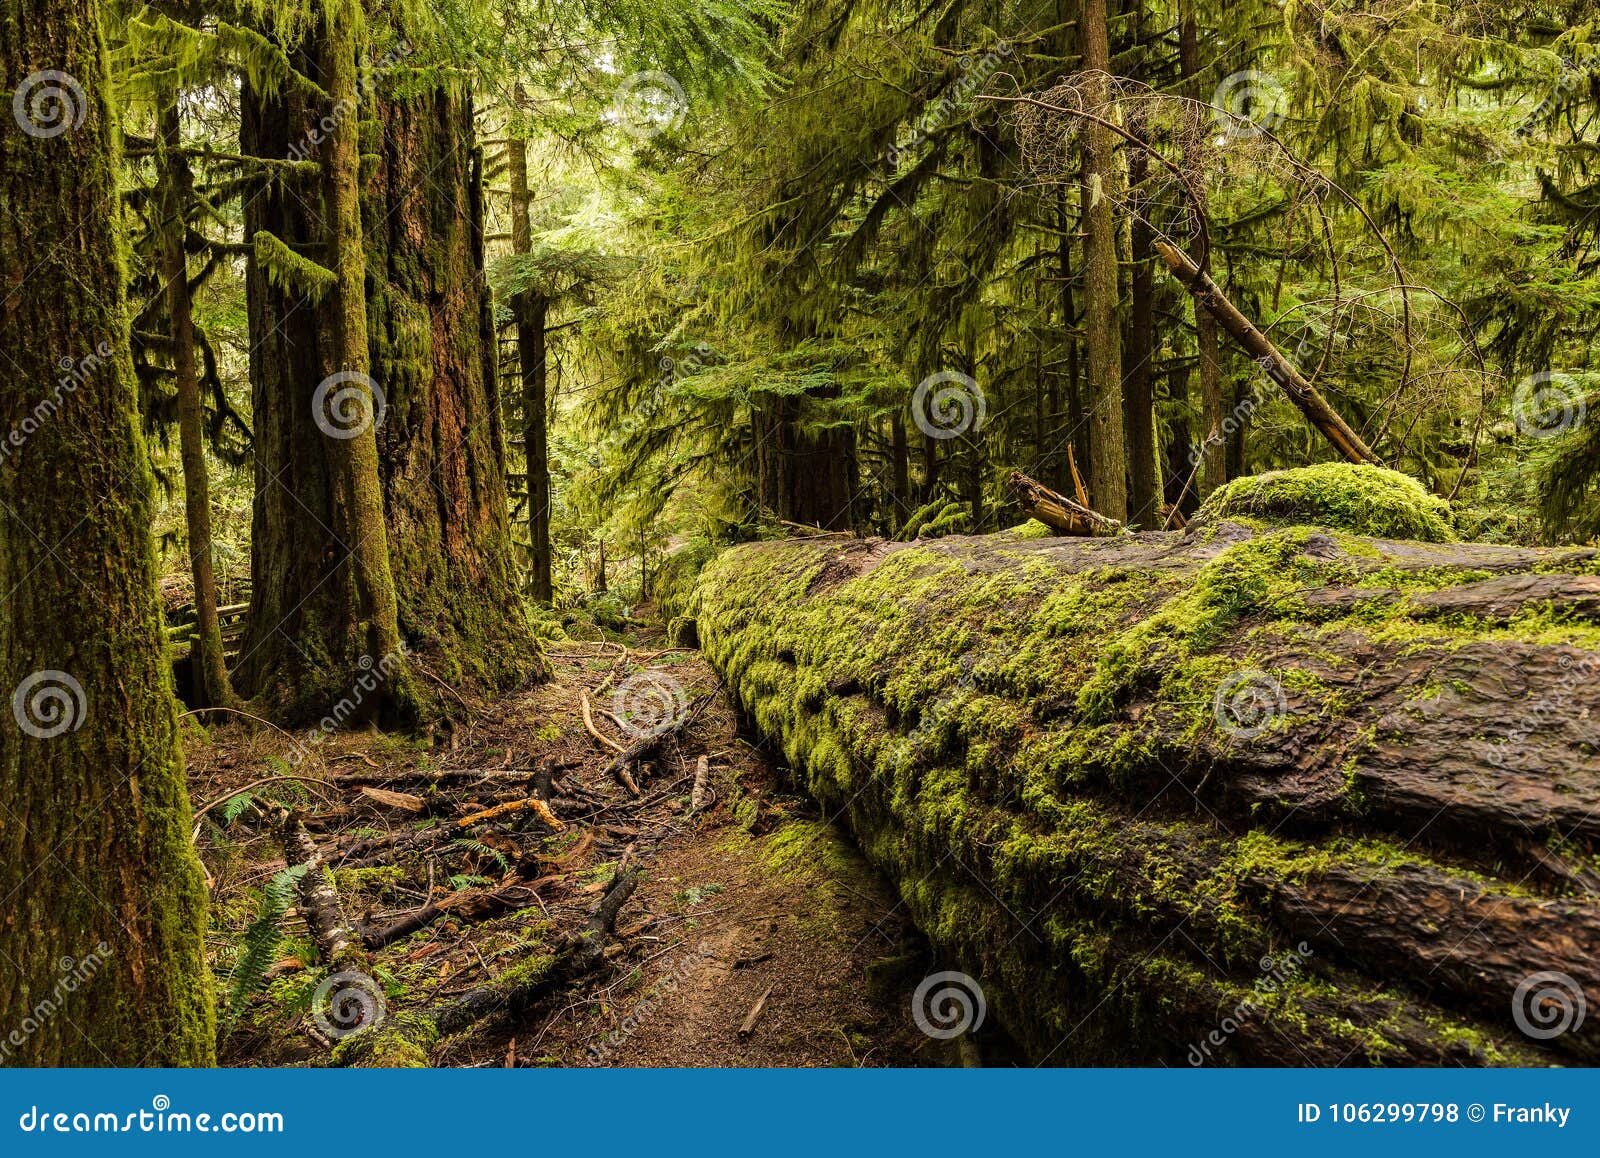 cathedral grove - macmillan provincial park, vancouver island, b